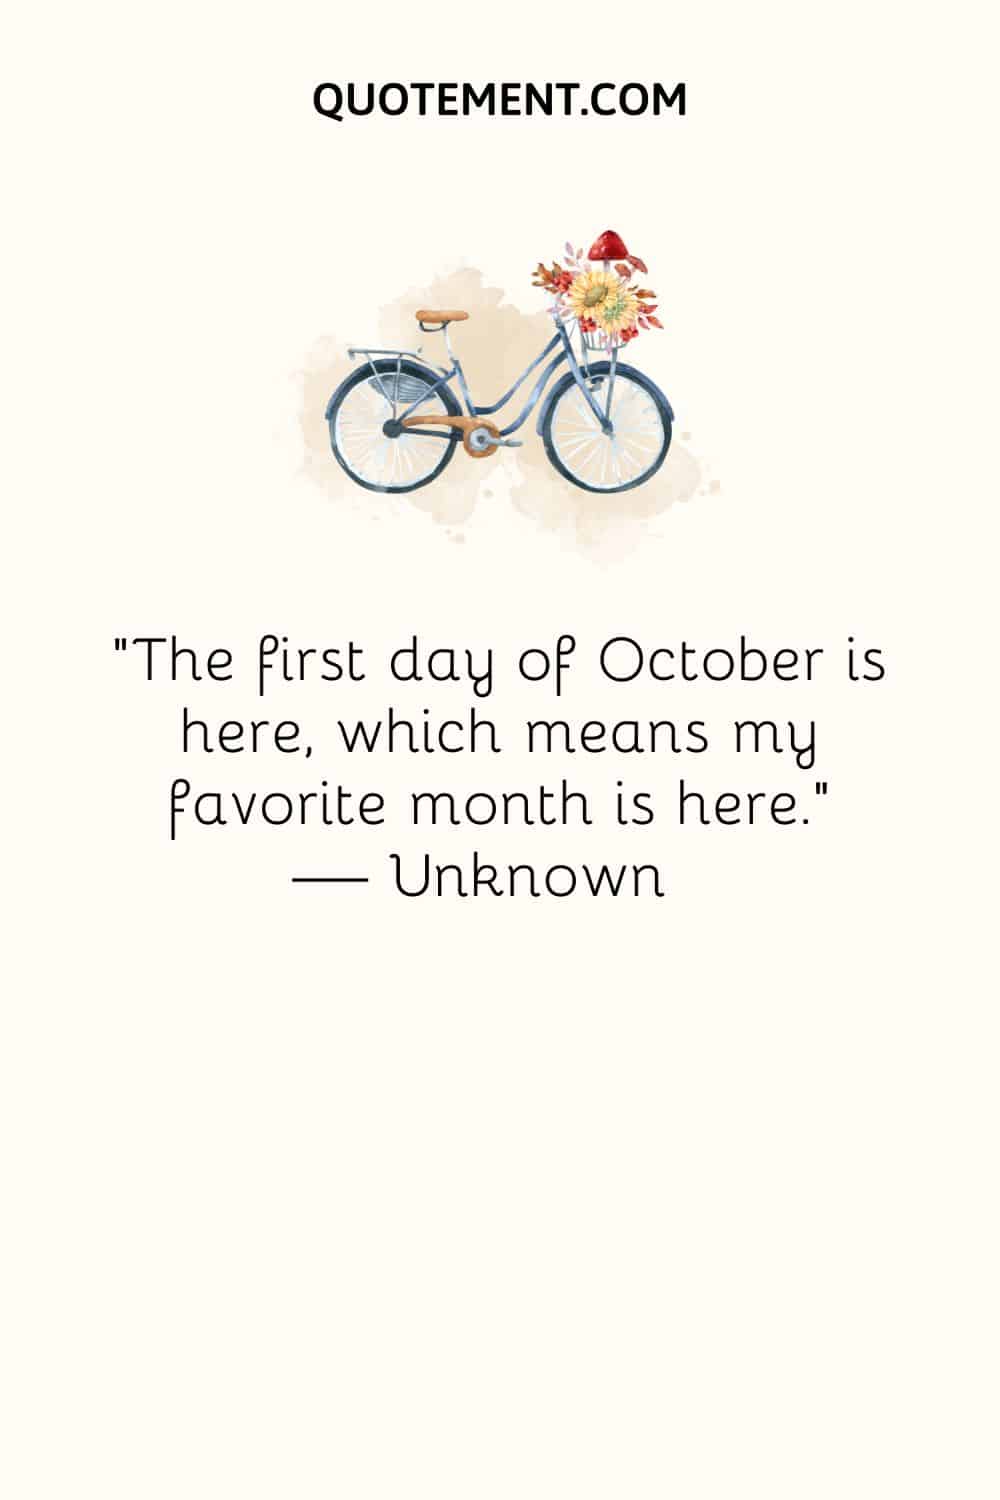 image of a bicycle carrying flowers representing inspirational first day of October quote